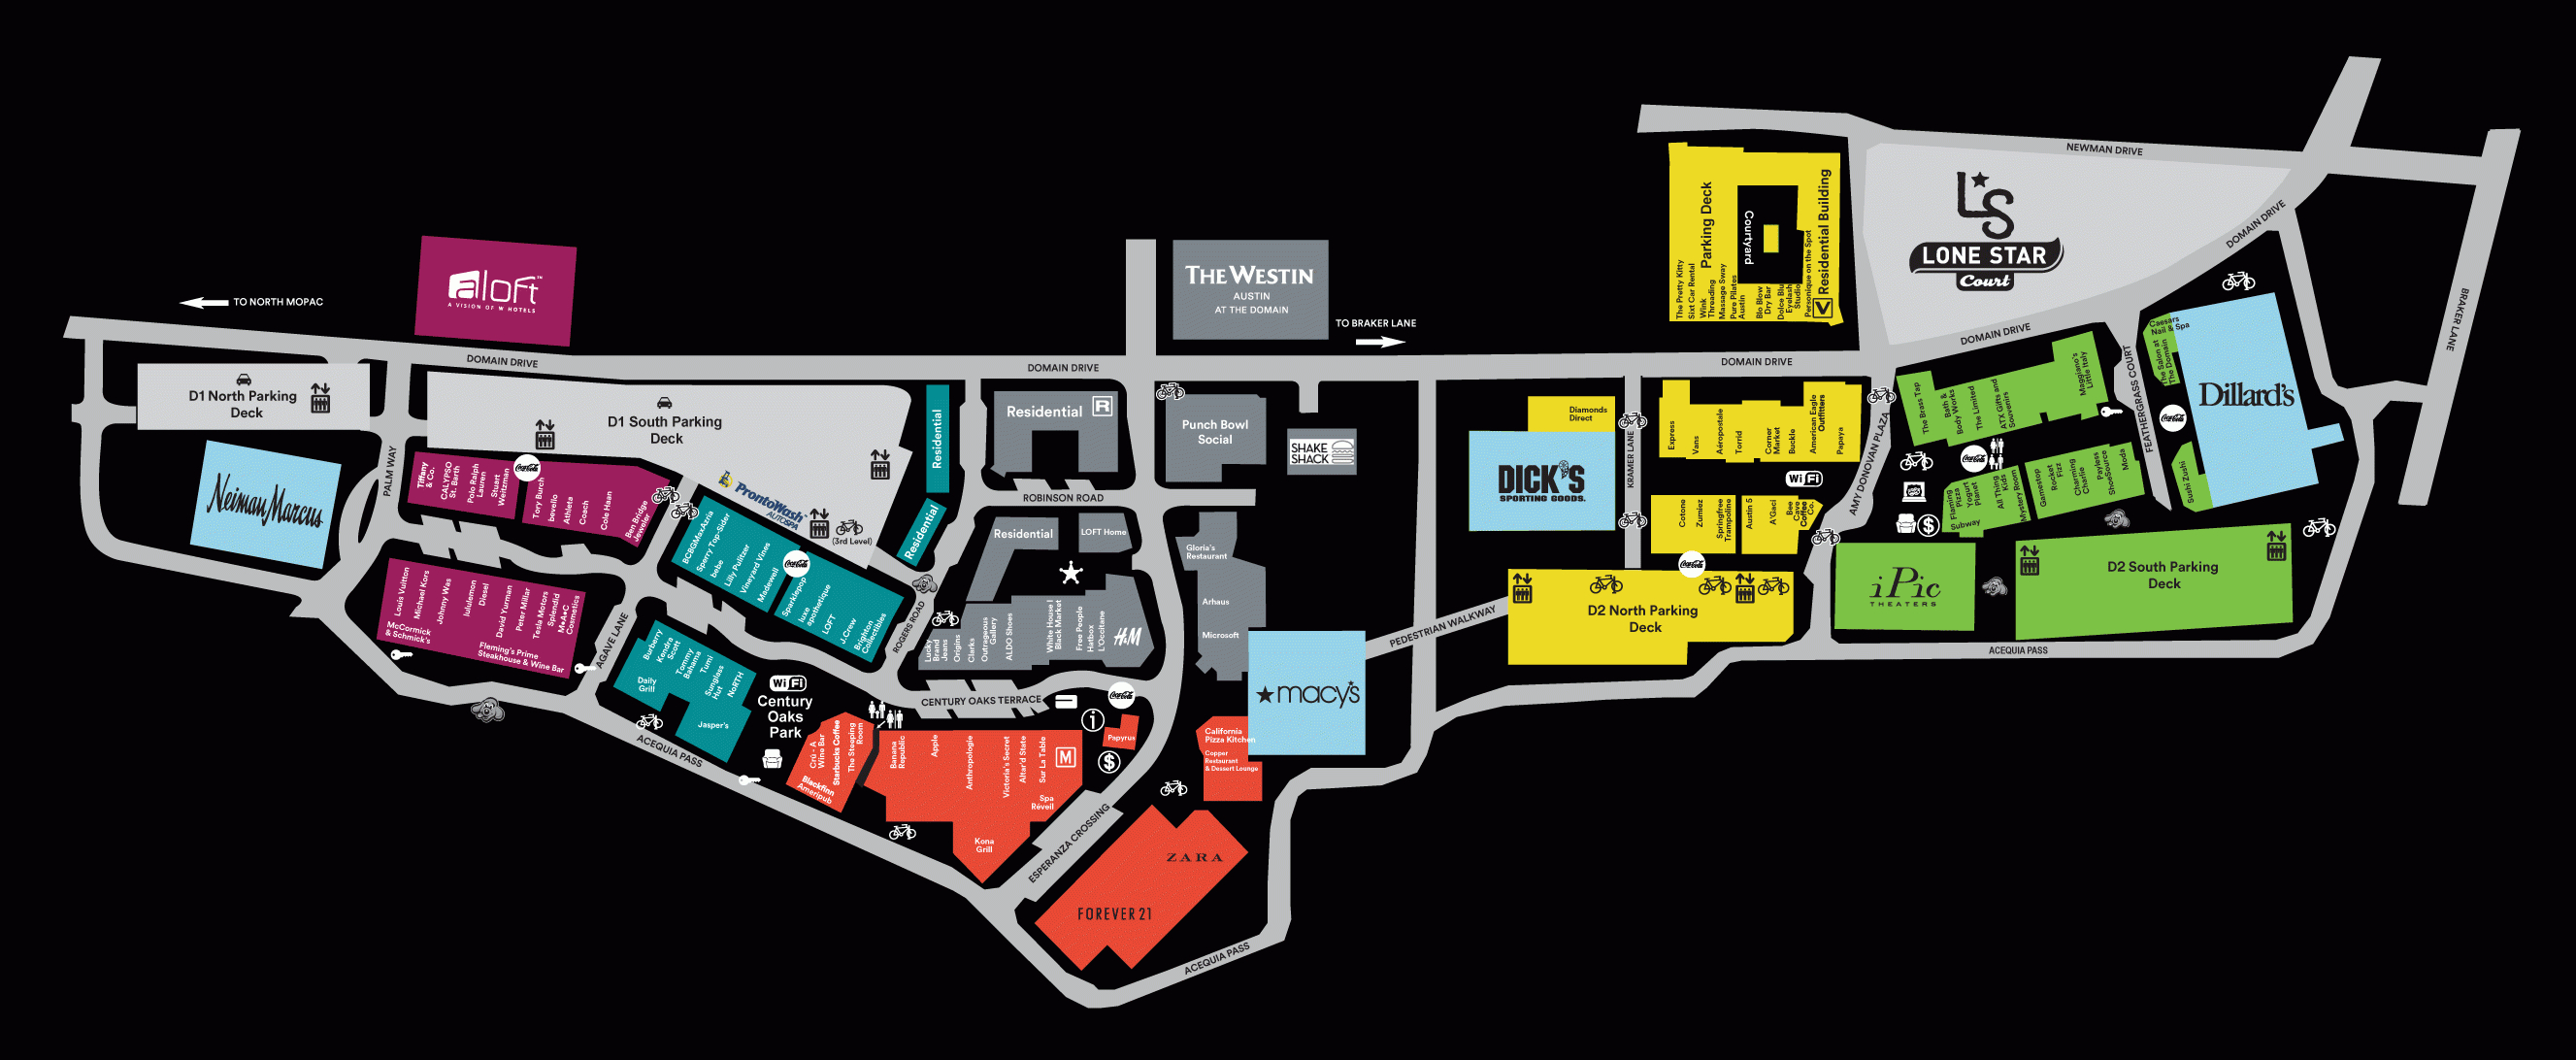 Center Map Of The Domain® - A Shopping Center In Austin, Tx - A - Map Of The Domain In Austin Texas